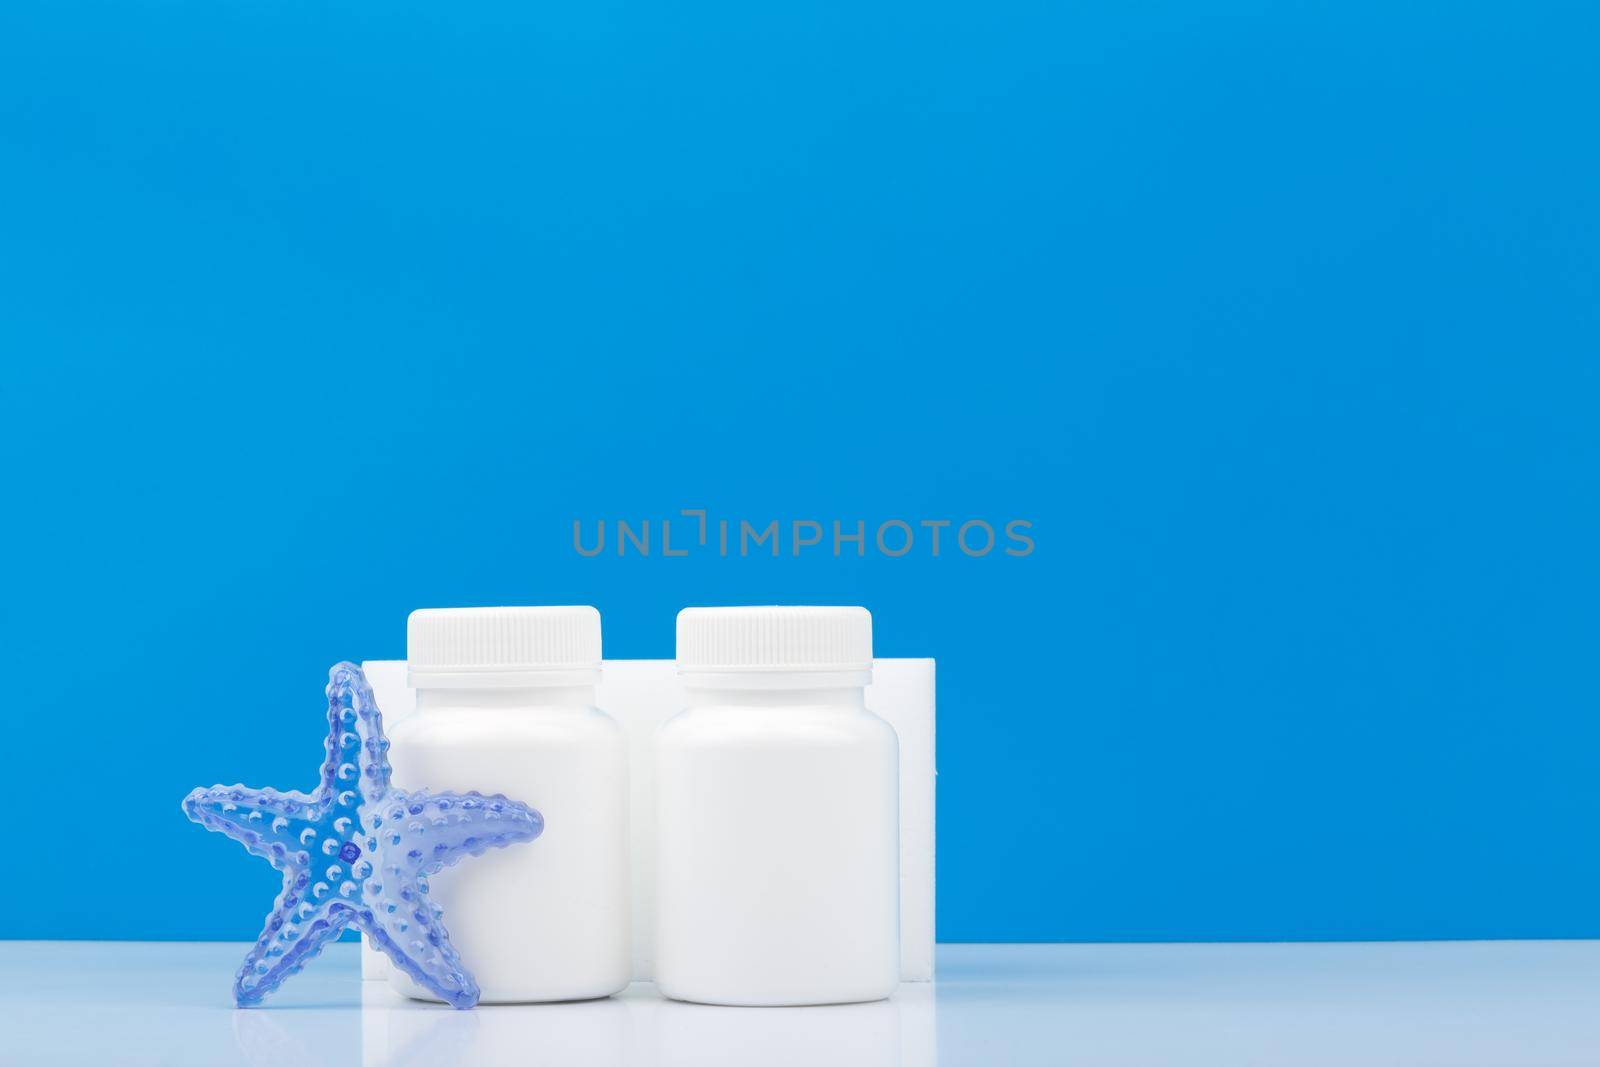 Two medication bottles with sea star against blue background with copy space. Supplements with sea minerals for healthy lifestyle and wellness. Concept of wellness, vitamins and supplements